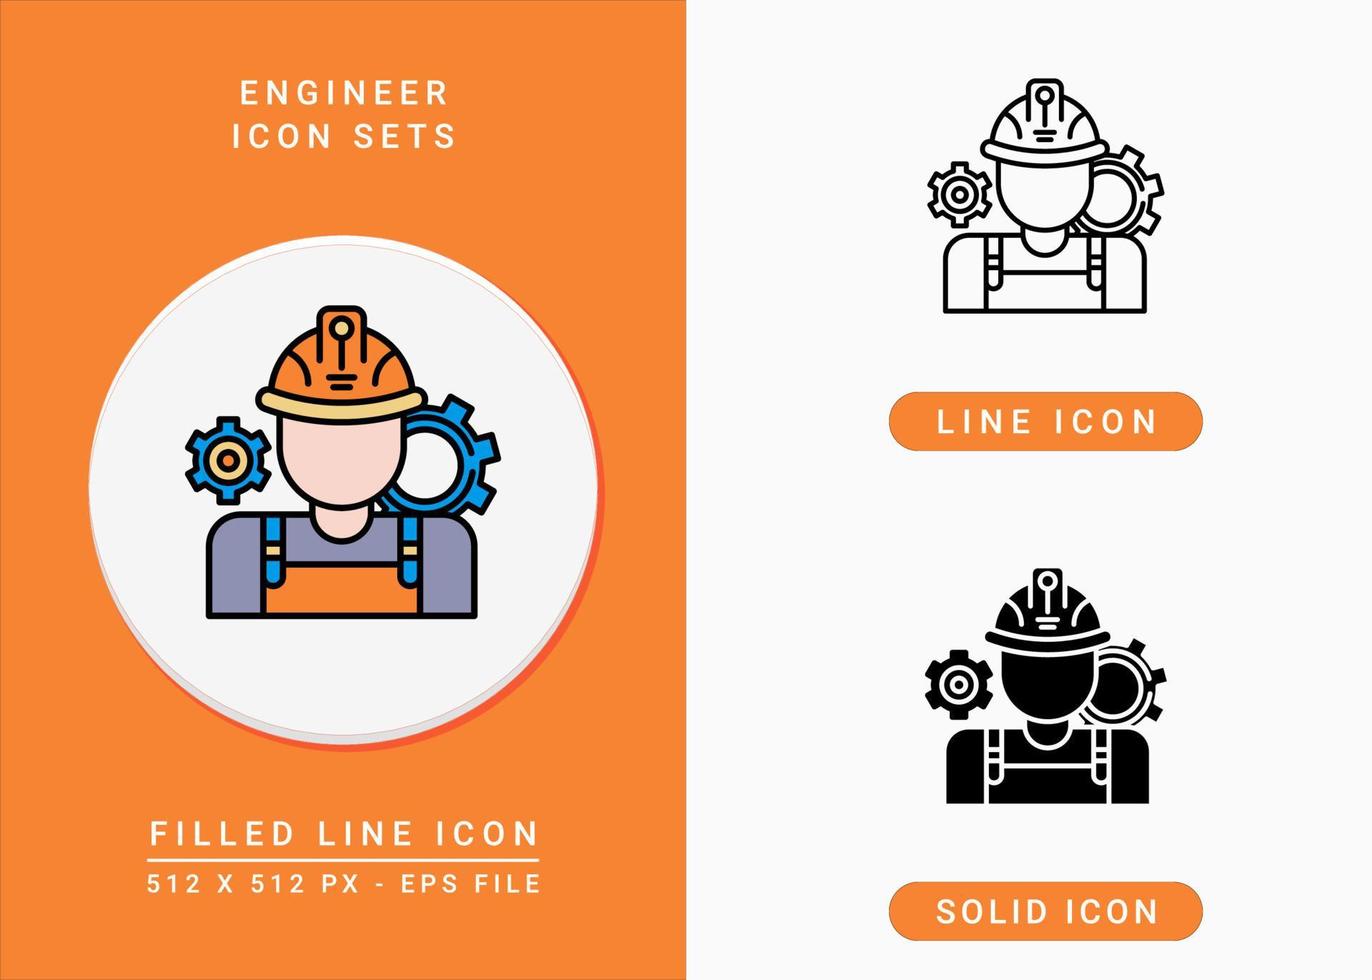 Engineer icons set vector illustration with solid icon line style. Engineering helm and gear symbol. Editable stroke icon on isolated background for web design, user interface, and mobile app